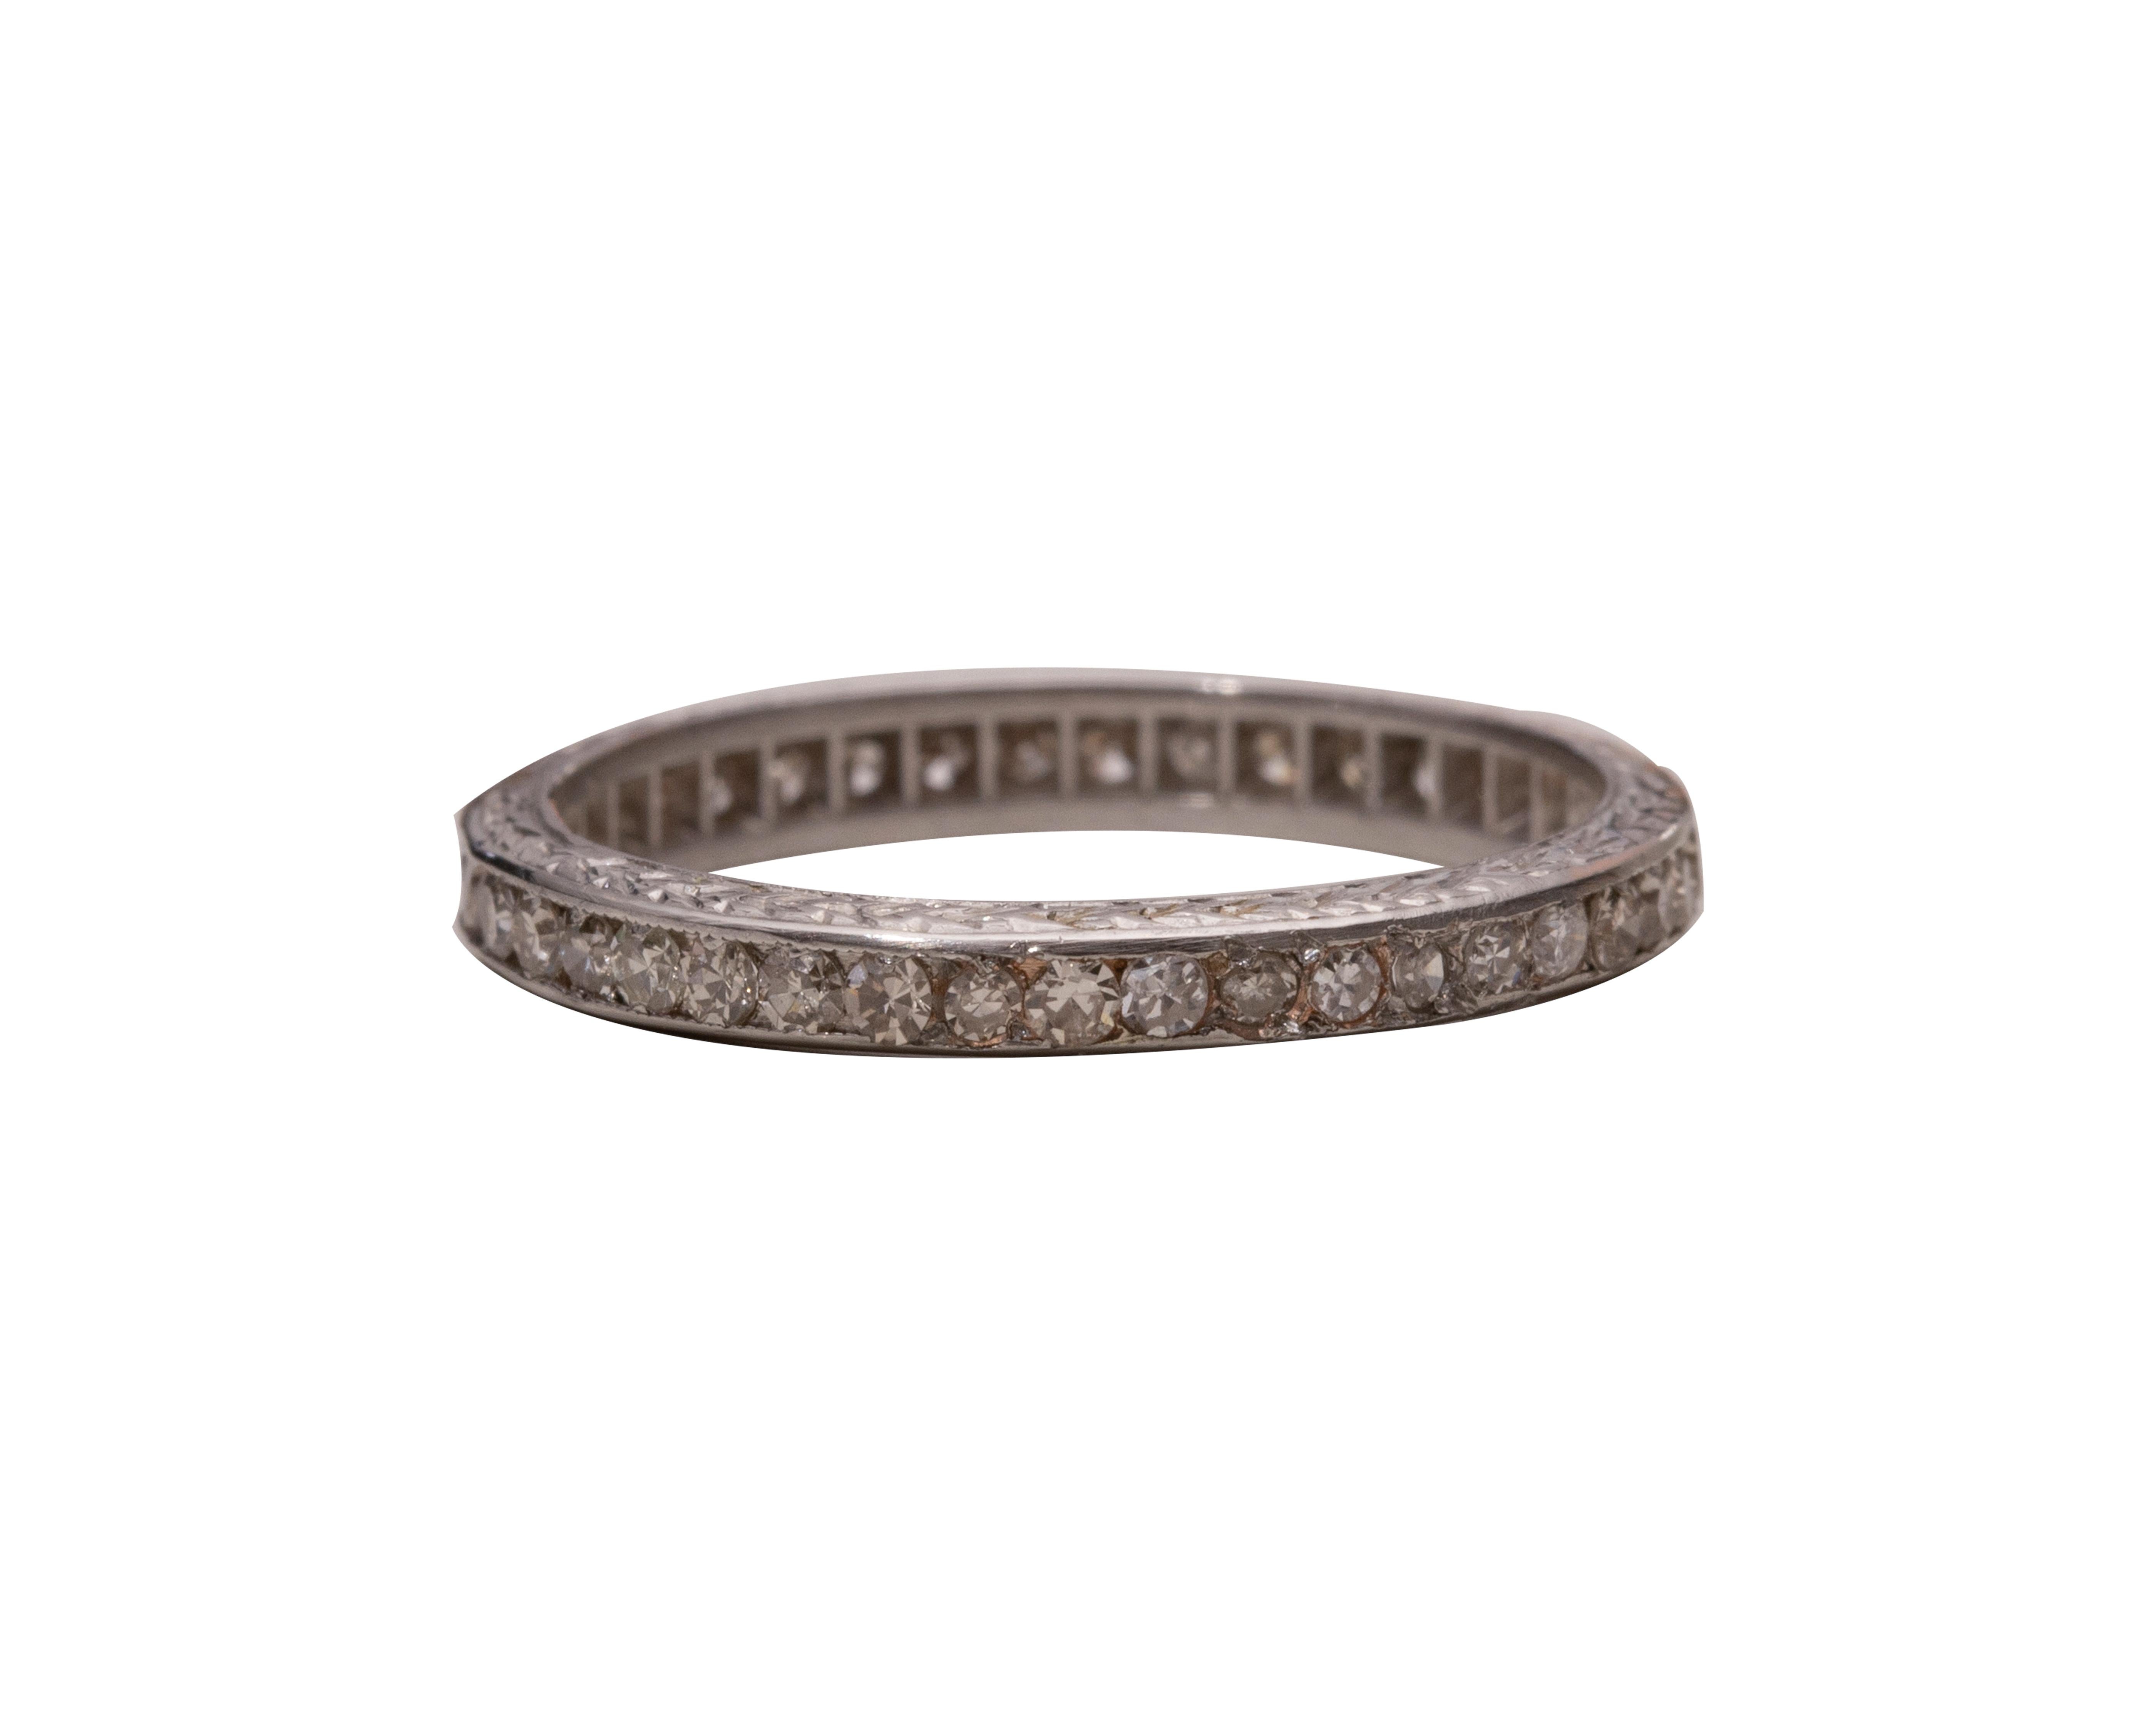 Here we have a sparkling diamond eternity wedding band from the 1920's!  Crafted in platinum this excellent example of an early eternity band is absolutely gorgeous! The antique single cuts are appropriate for the era and are nested securely in the